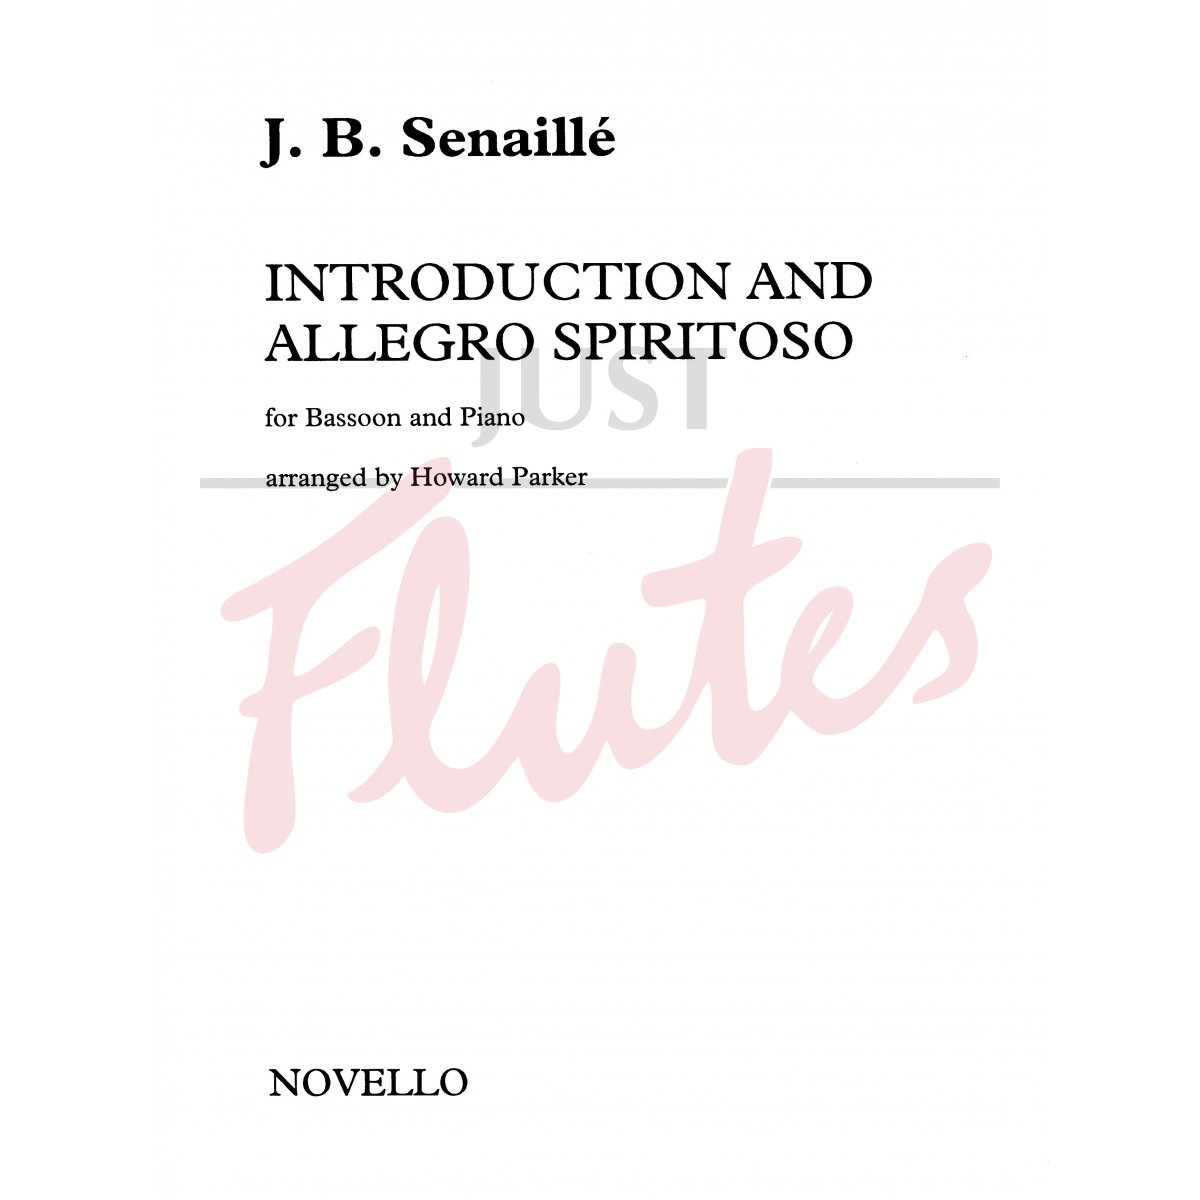 Introduction and Allegro Spiritoso for Bassoon and Piano